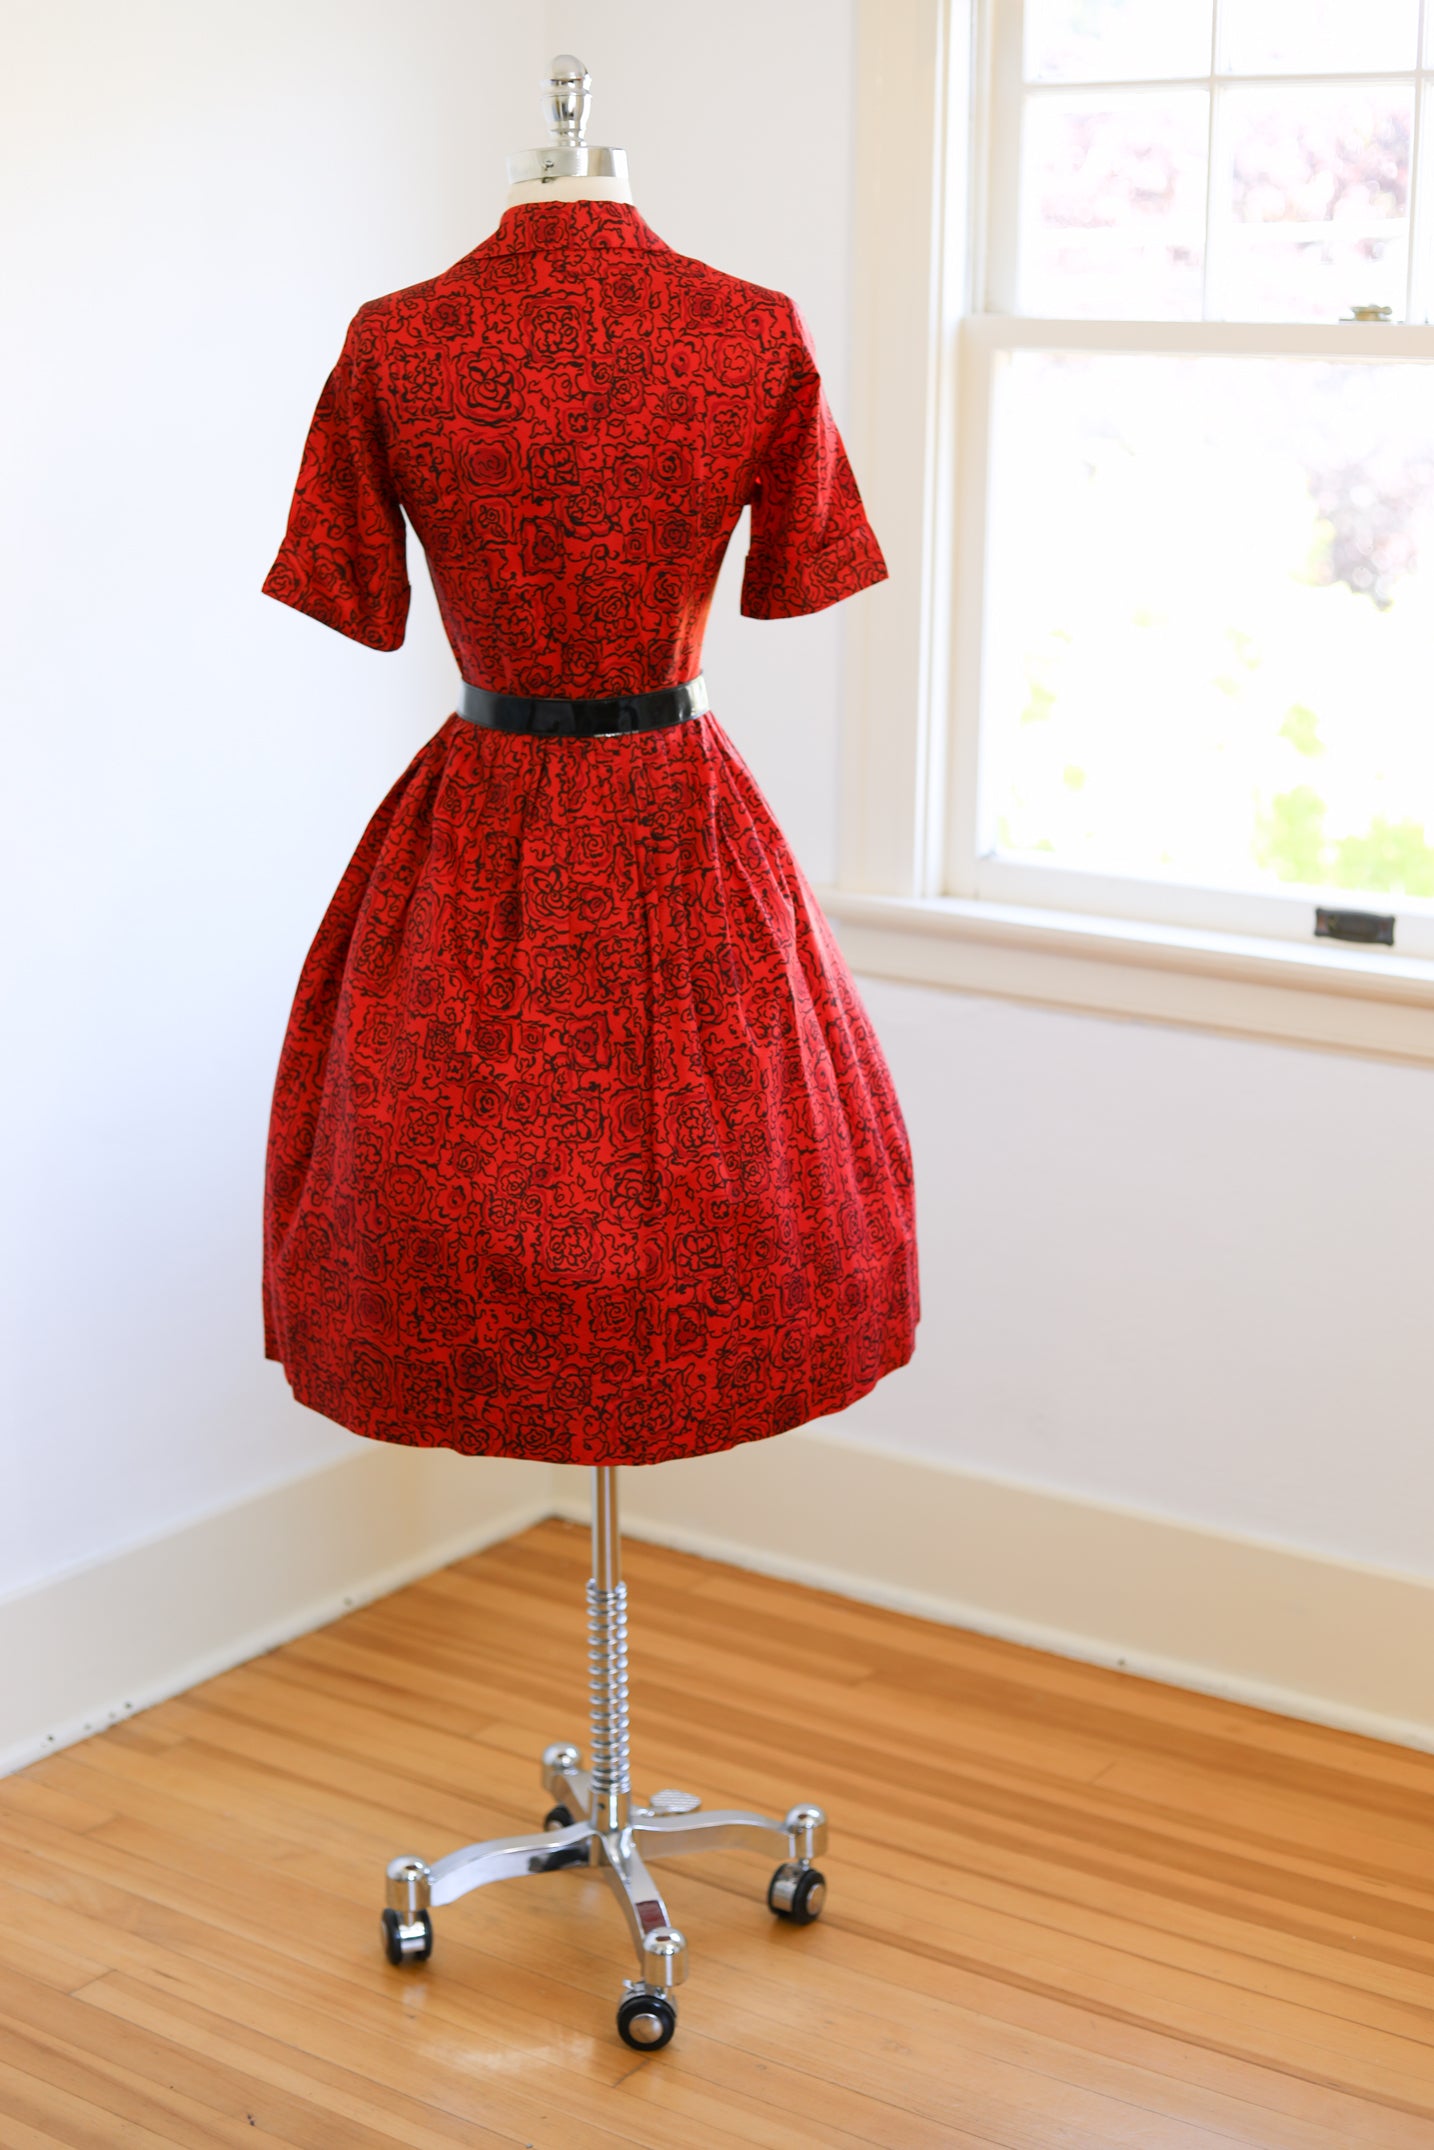 Vintage 1960s Dress - VIVID Scarlet Red + Black Abstracted Rose Print Shirtwaist w Buttons to the Hem! Size M